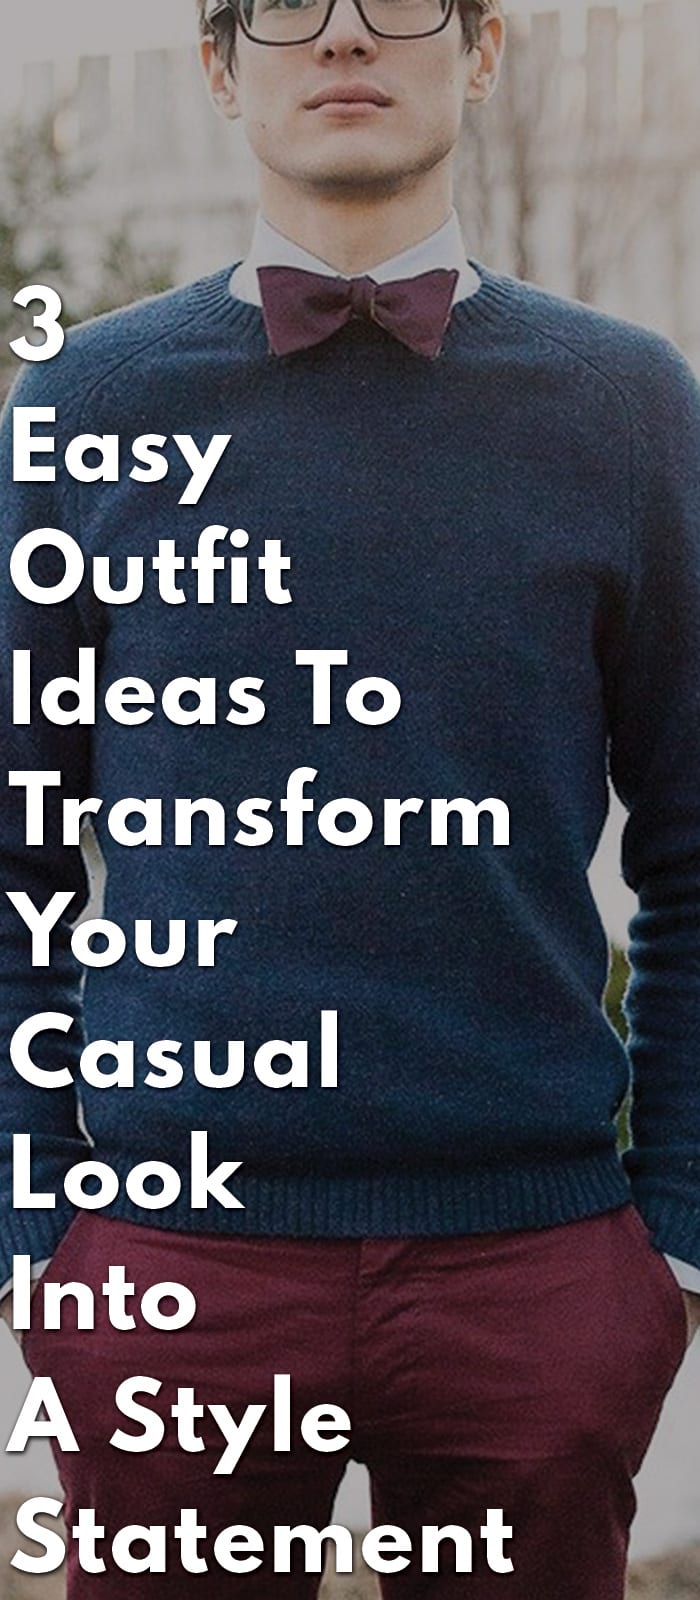 3-Easy-Outfit-Ideas-To-Transform-Your-Casual-Look-Into-A-Style-Statement